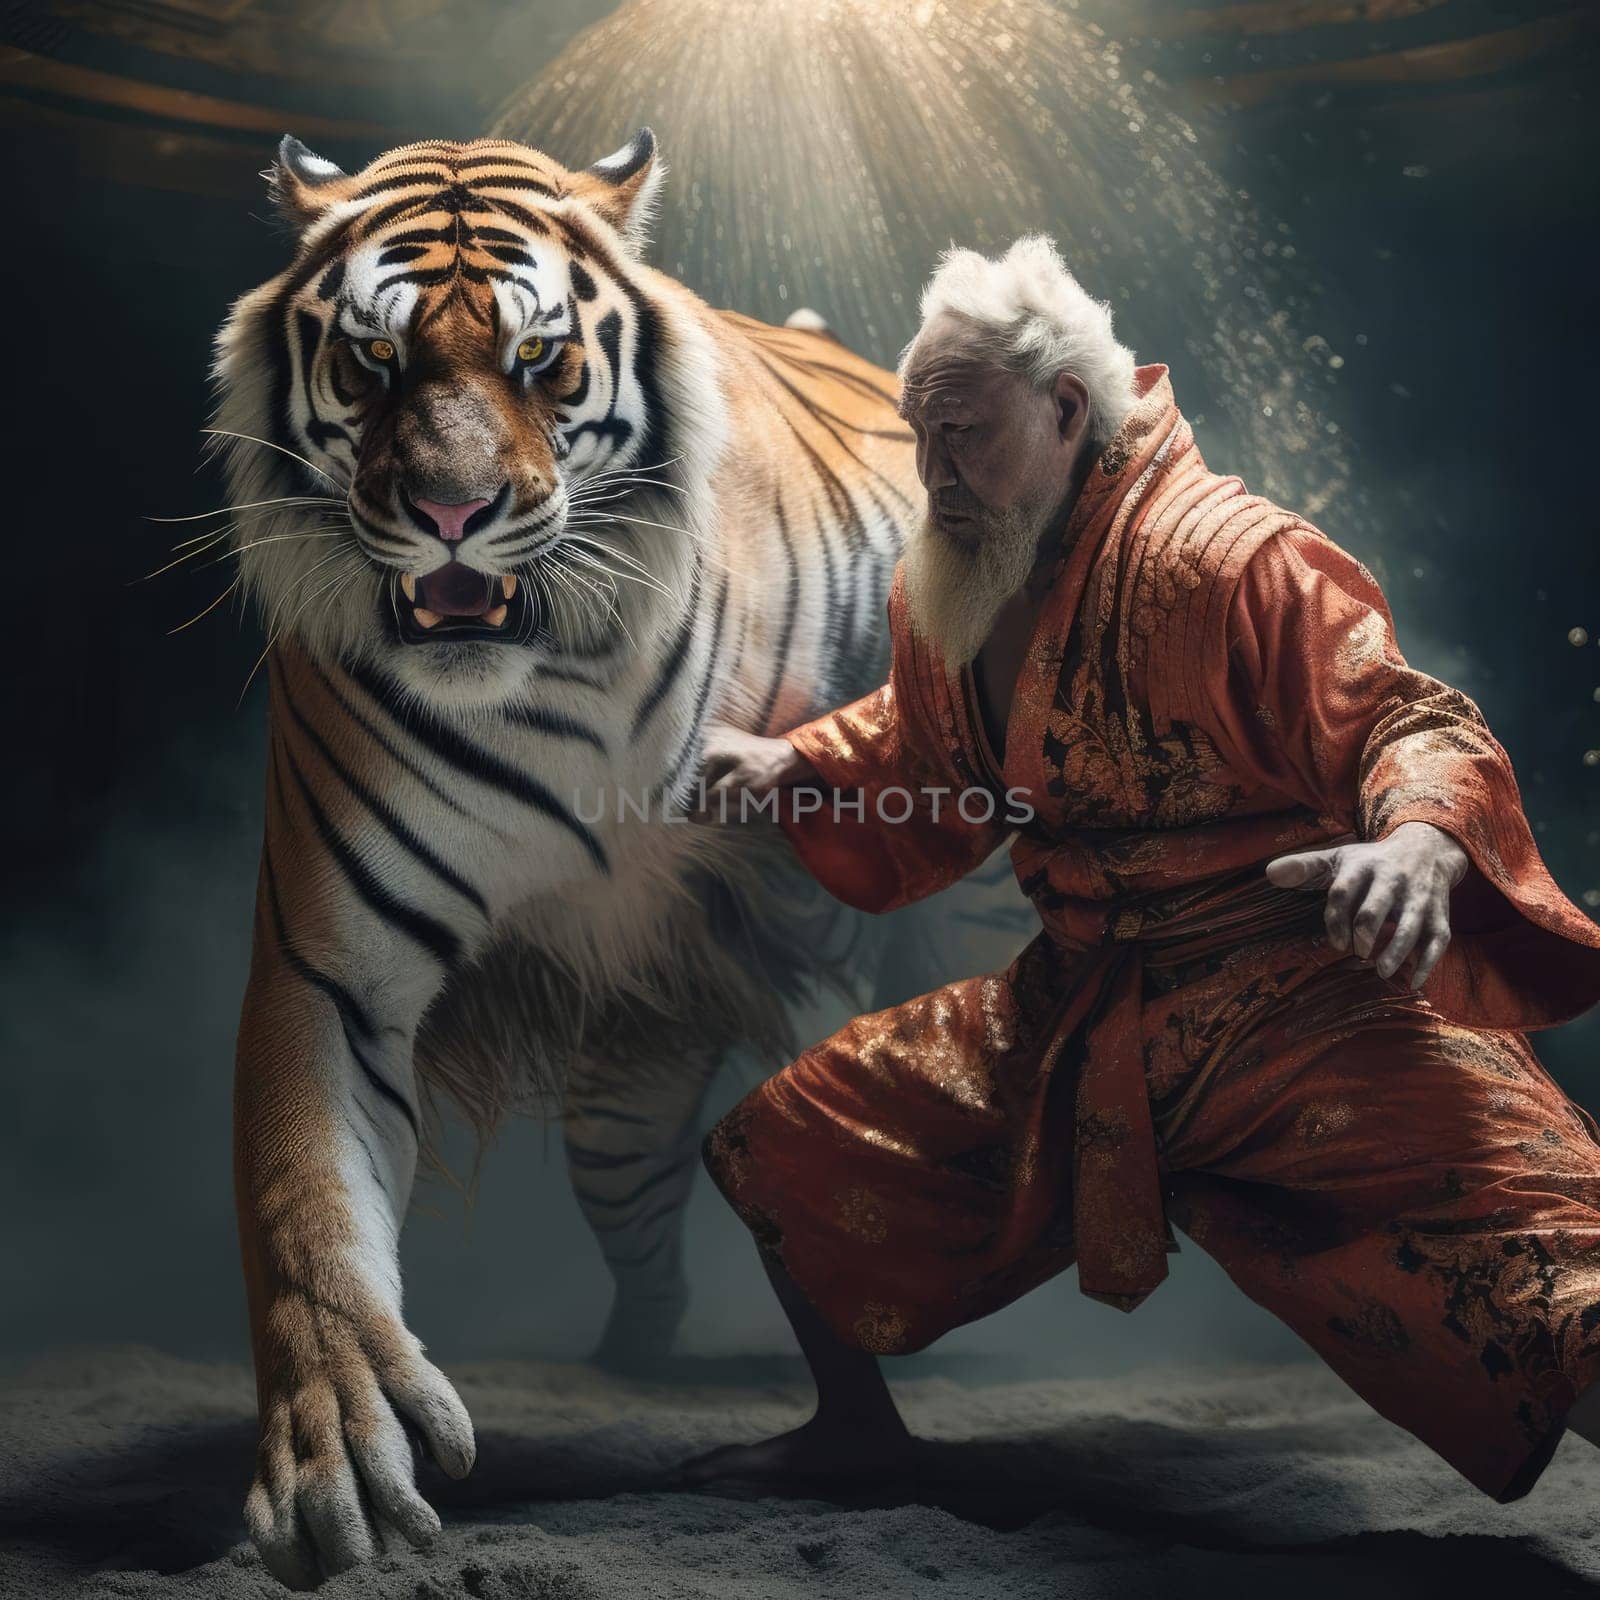 Tiger fights with man by cherezoff